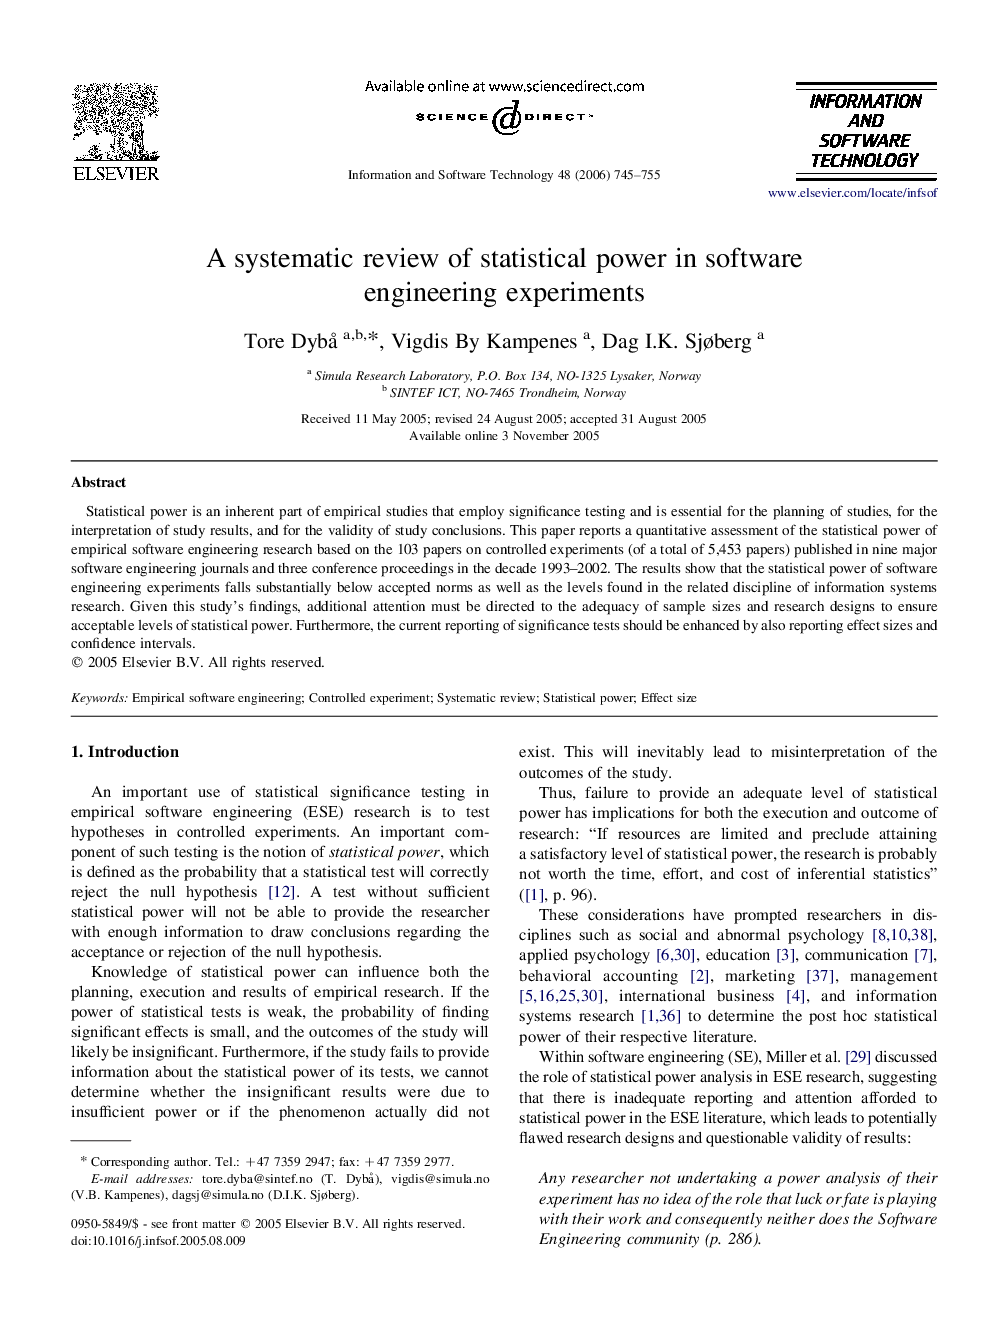 A systematic review of statistical power in software engineering experiments